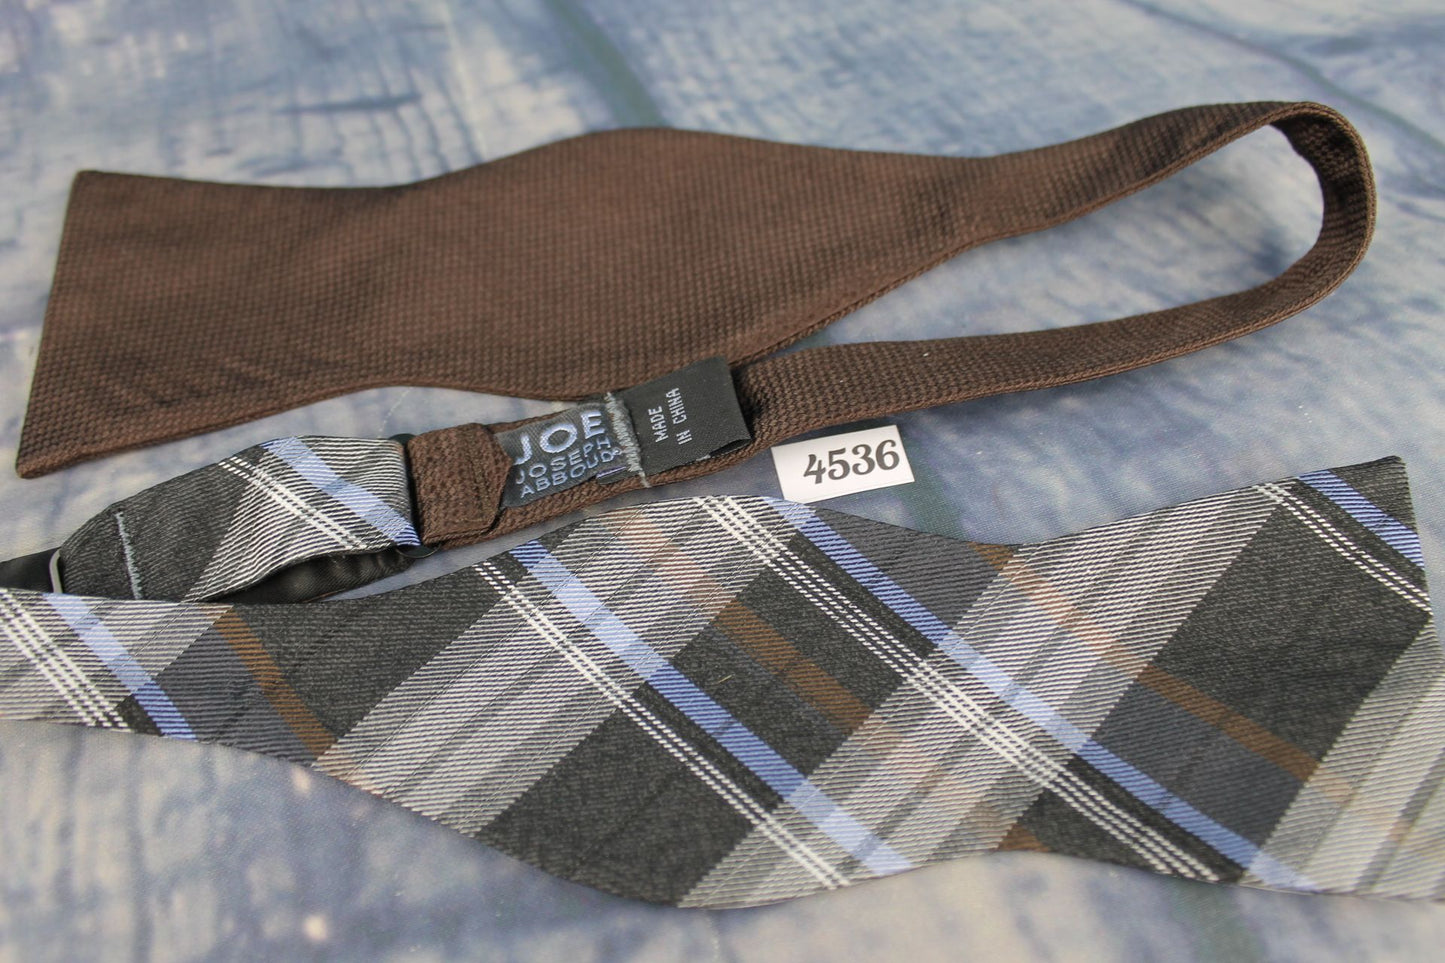 Superb Joseph Abboud Unusual Different Ended Brown Tartan Plaid Self Tie Square End Thistle Bow Tie